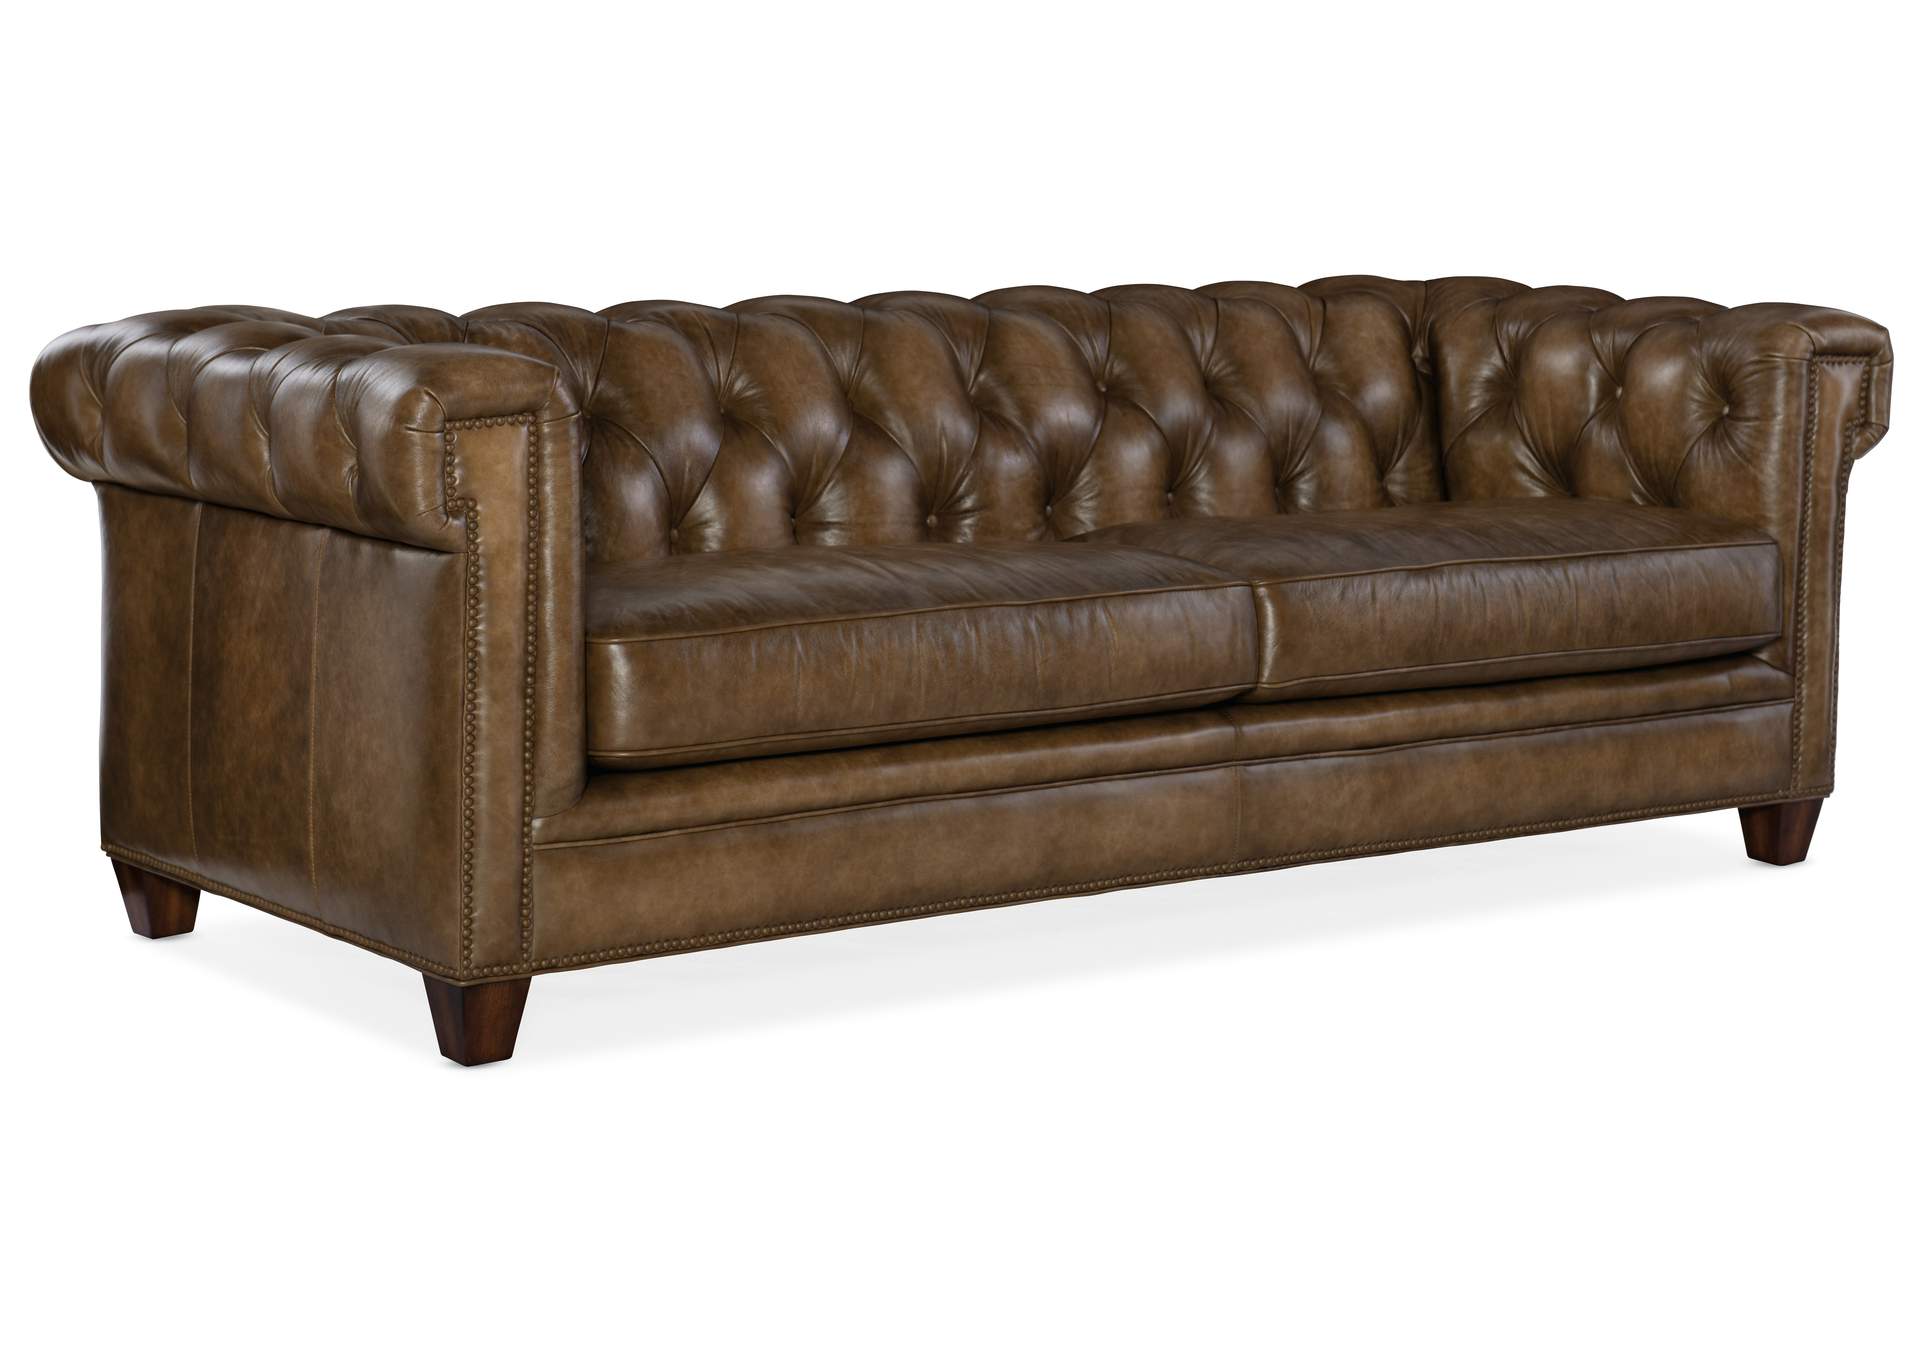 Chester Tufted Stationary Sofa,Hooker Furniture